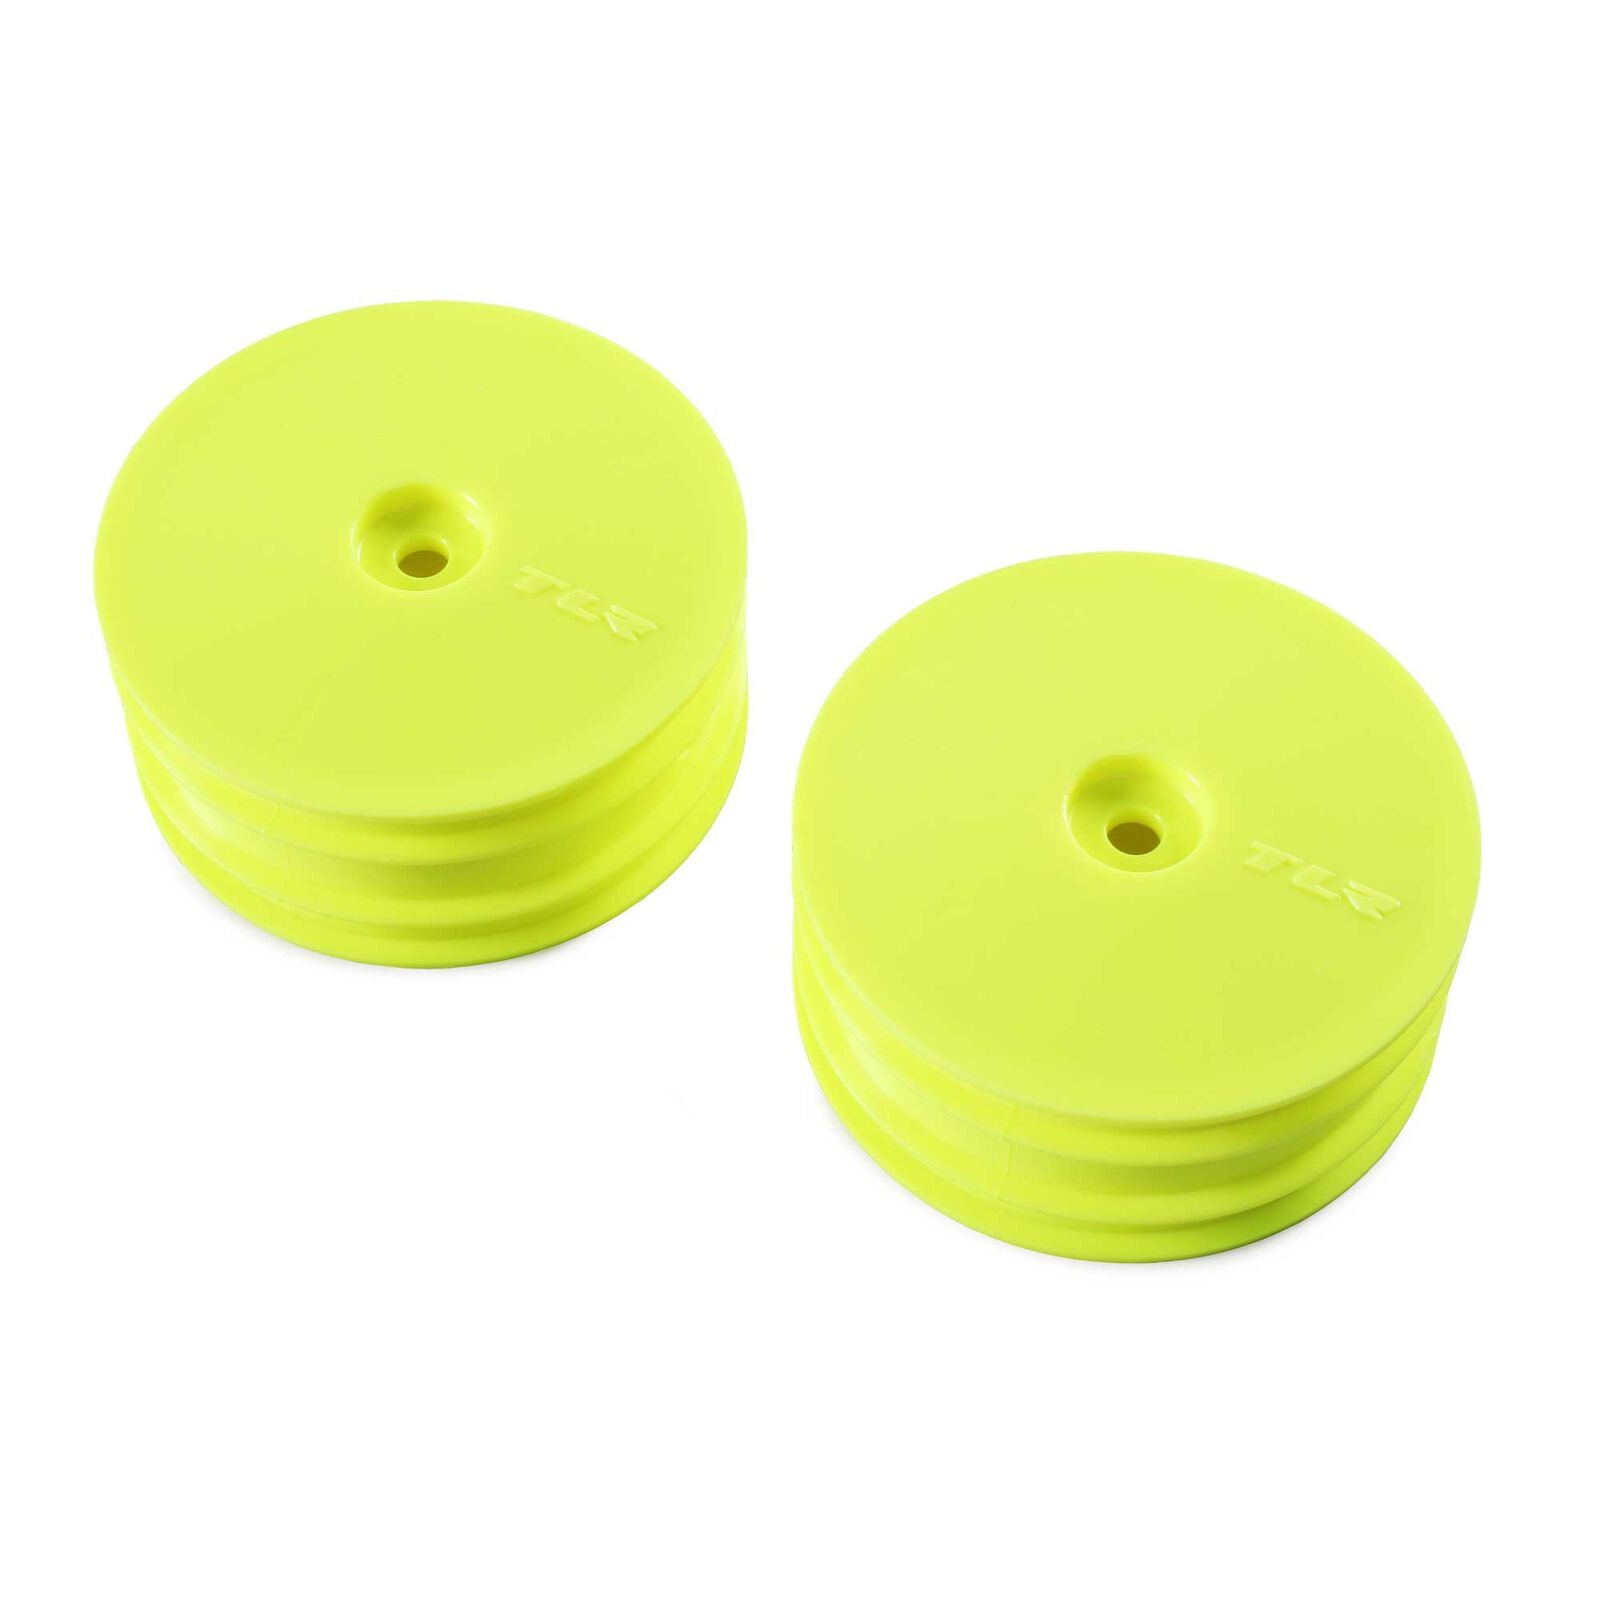 Team Losi Racing 22X-4 12mm Hex 4WD Front Buggy Wheels (2) (Yellow) - TLR43021 - [Sunshine-Coast] - Losi - [RC-Car] - [Scale-Model]